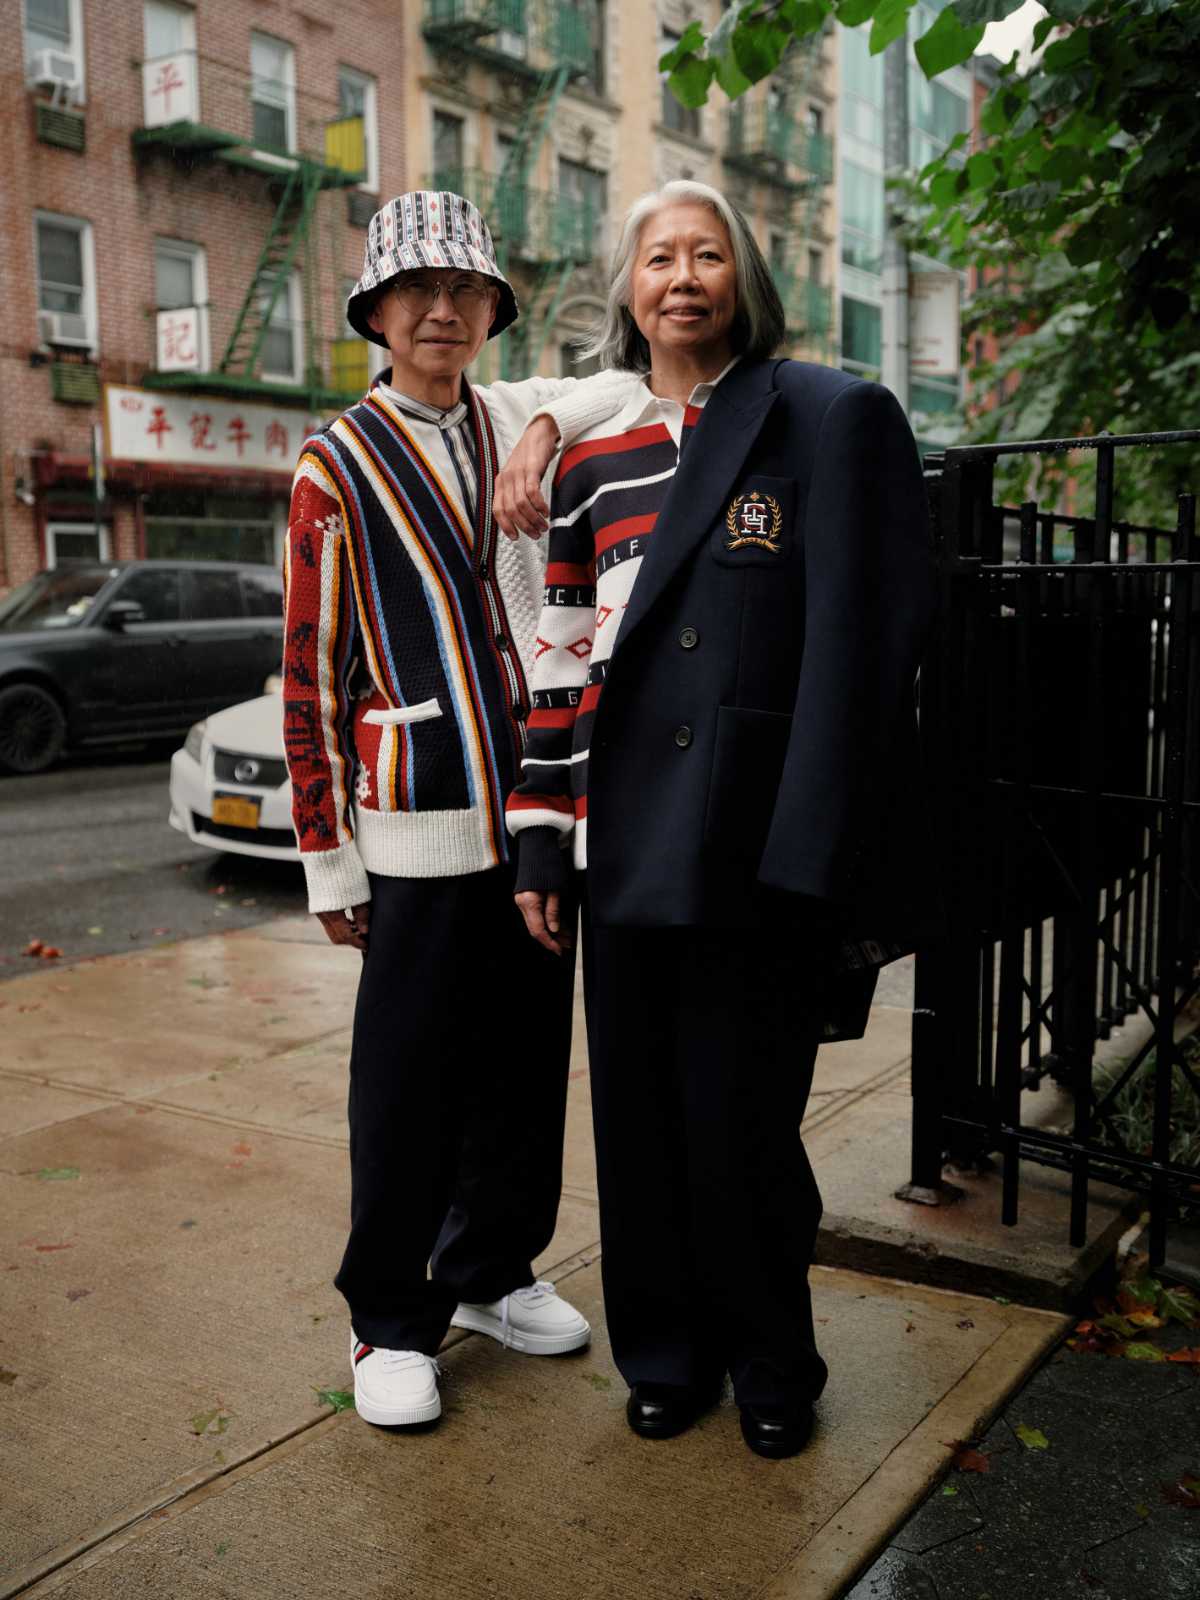 TOMMY HILFIGER AND CLOT ANNOUNCE COLLECTION CELEBRATING THE YEAR OF TH –  JUICESTORE